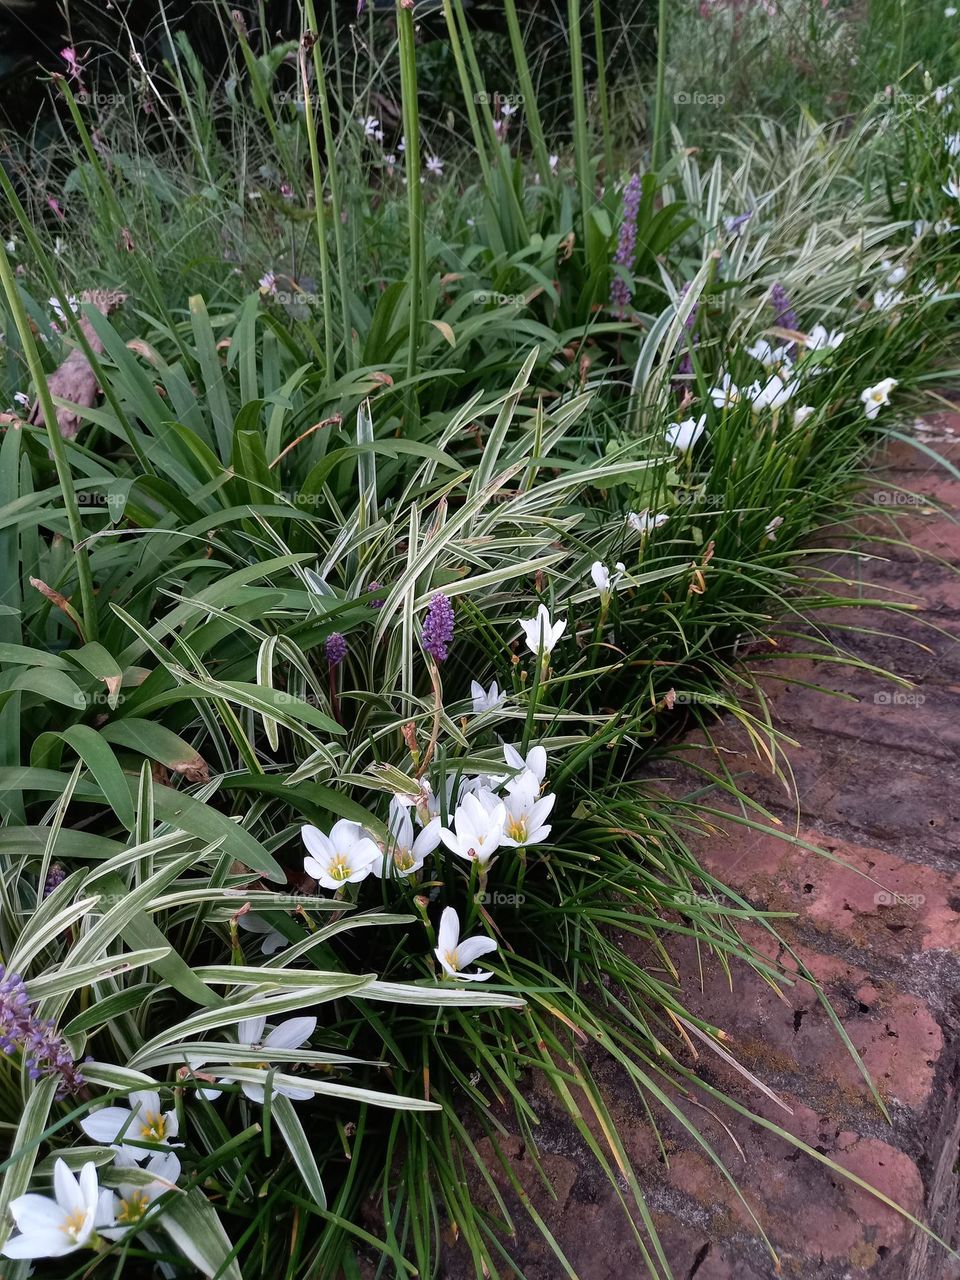 A row of flowers in the garden